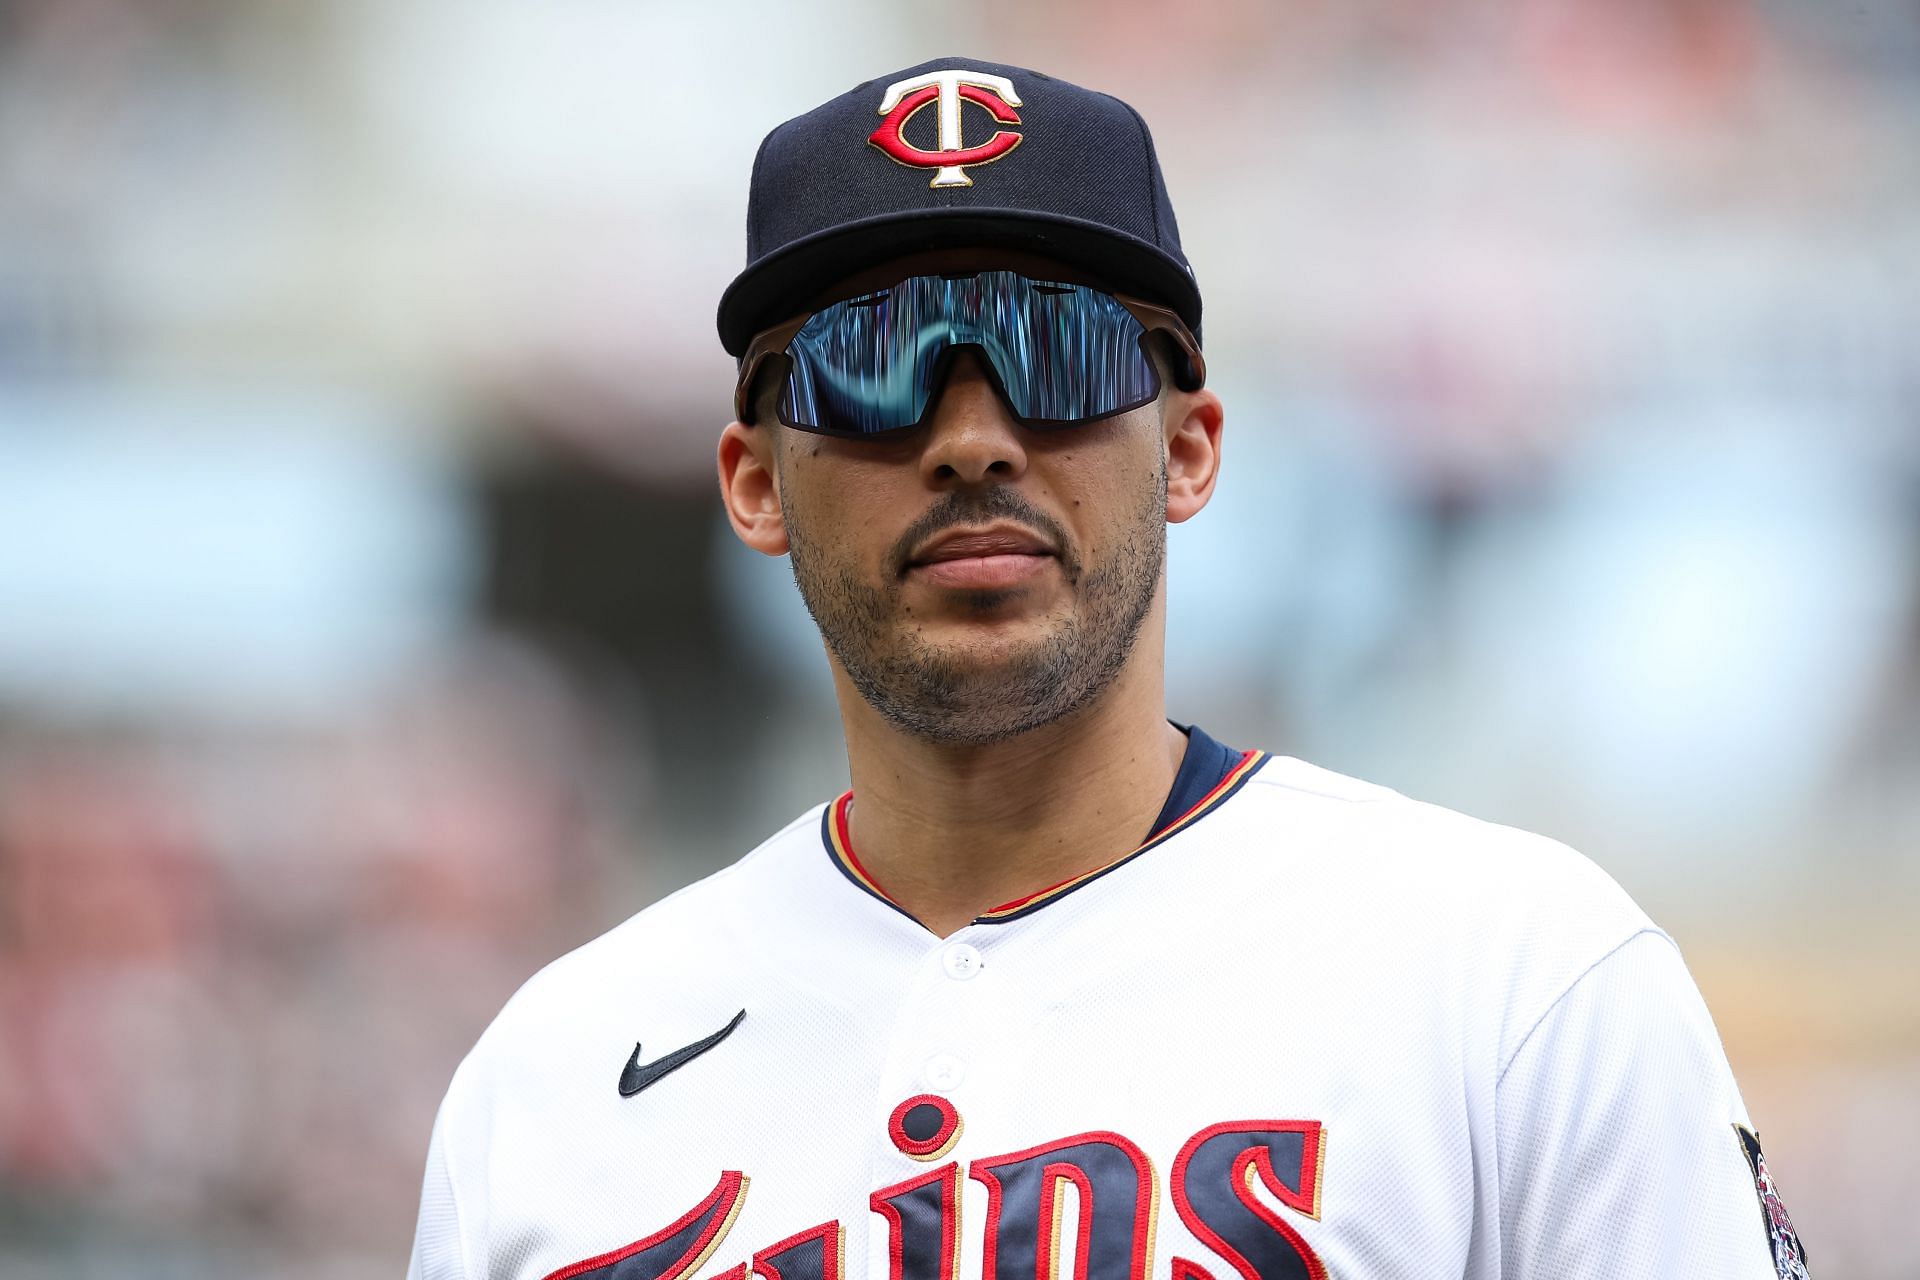 3 reasons Carlos Correa will end up re-signing with Twins in MLB free agency